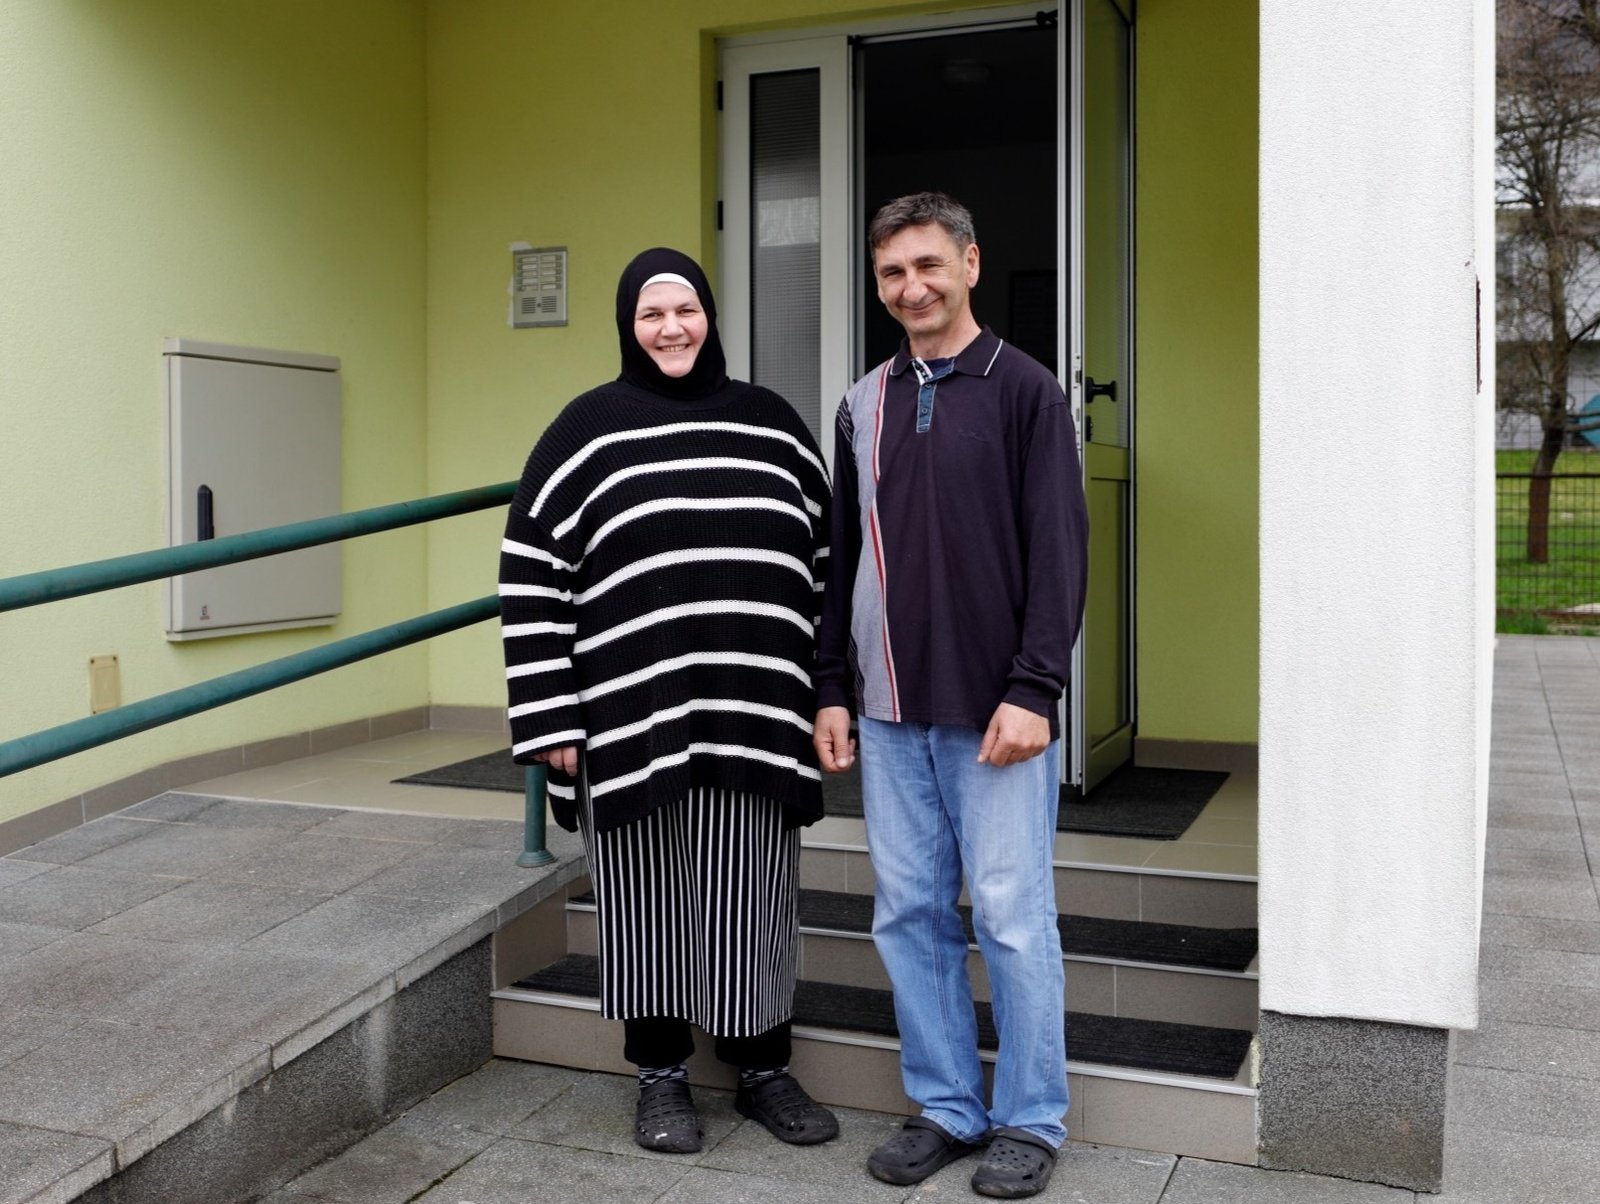 Anes, right and his wife in front of their apartment building, provided by the Regional Housing Programme in Bosnia and Herzegovina.